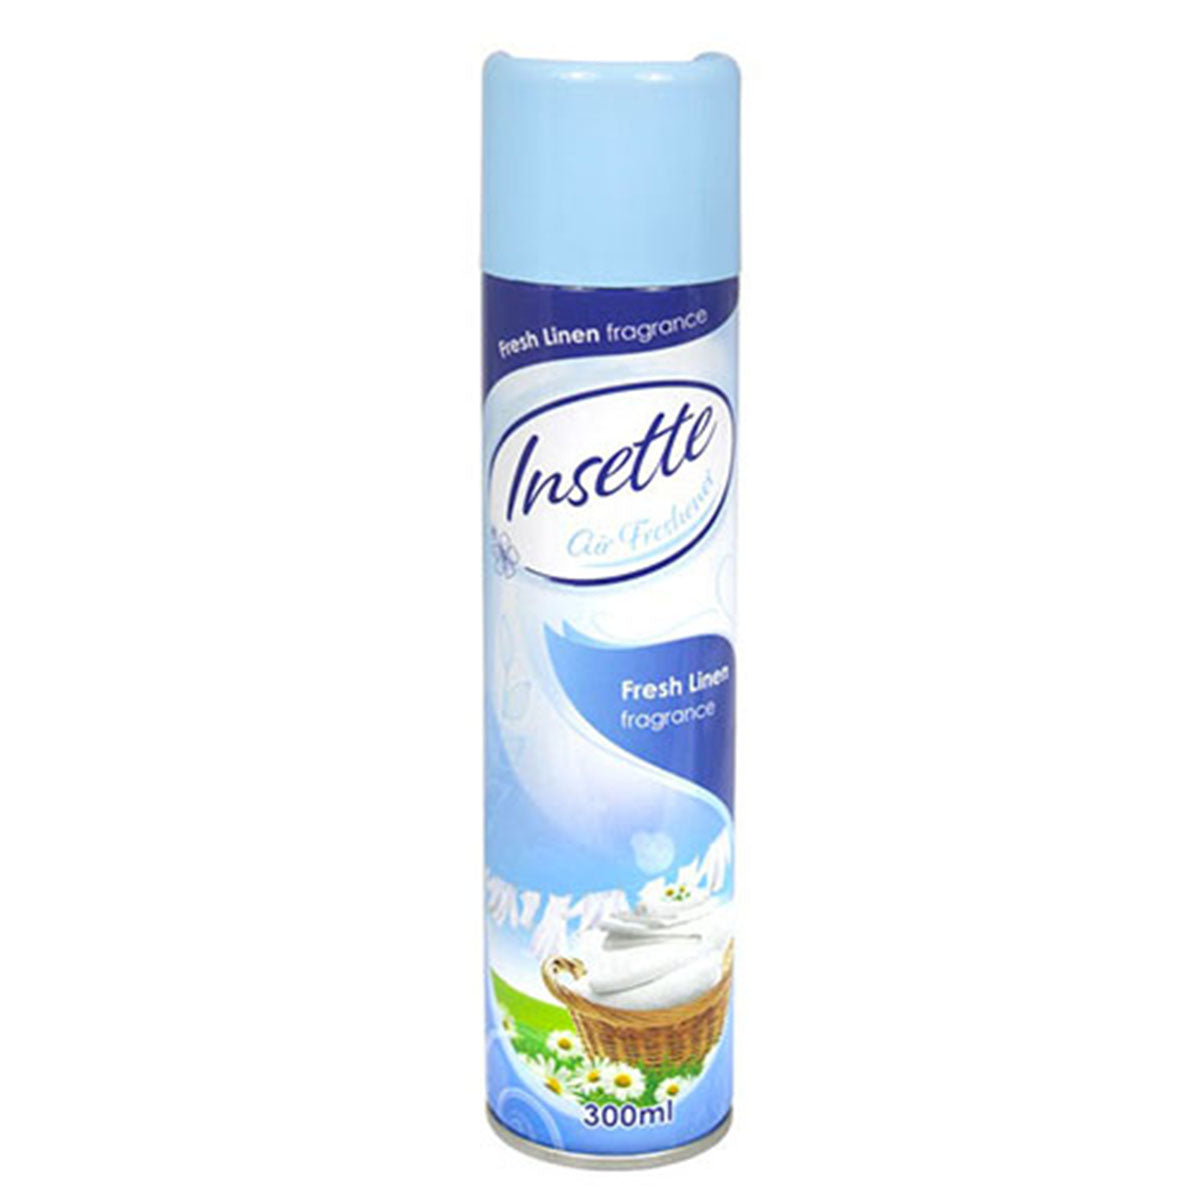 A can of Insette - Air Freshener Fresh Linen - 300ml on a white background.